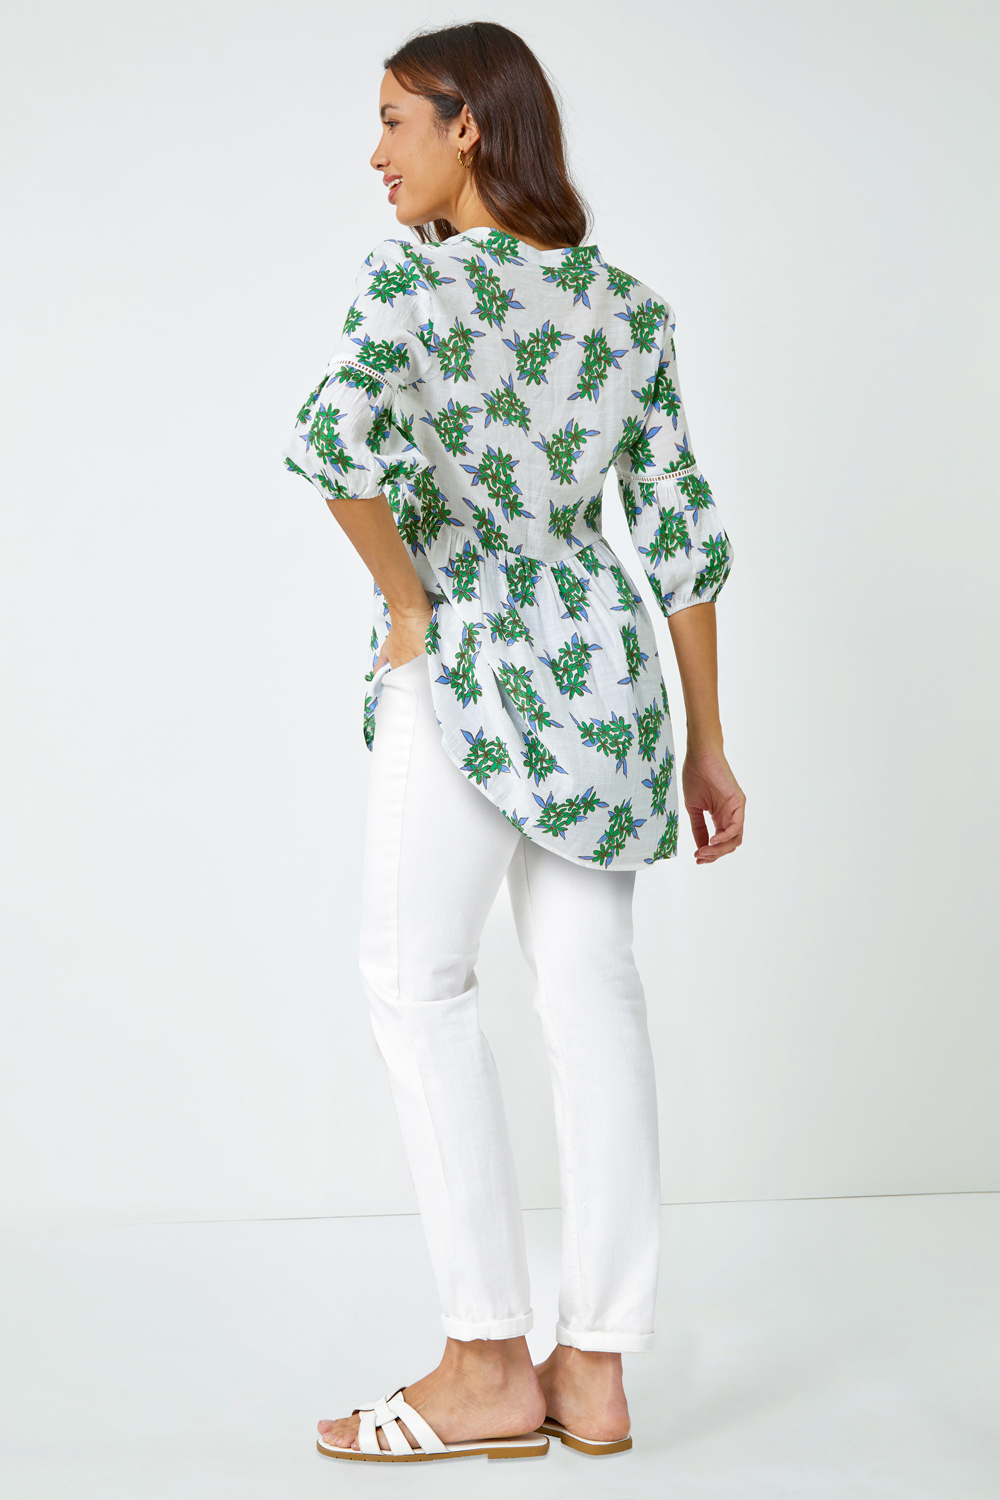 Green Floral Print Smock Tunic Top, Image 3 of 5